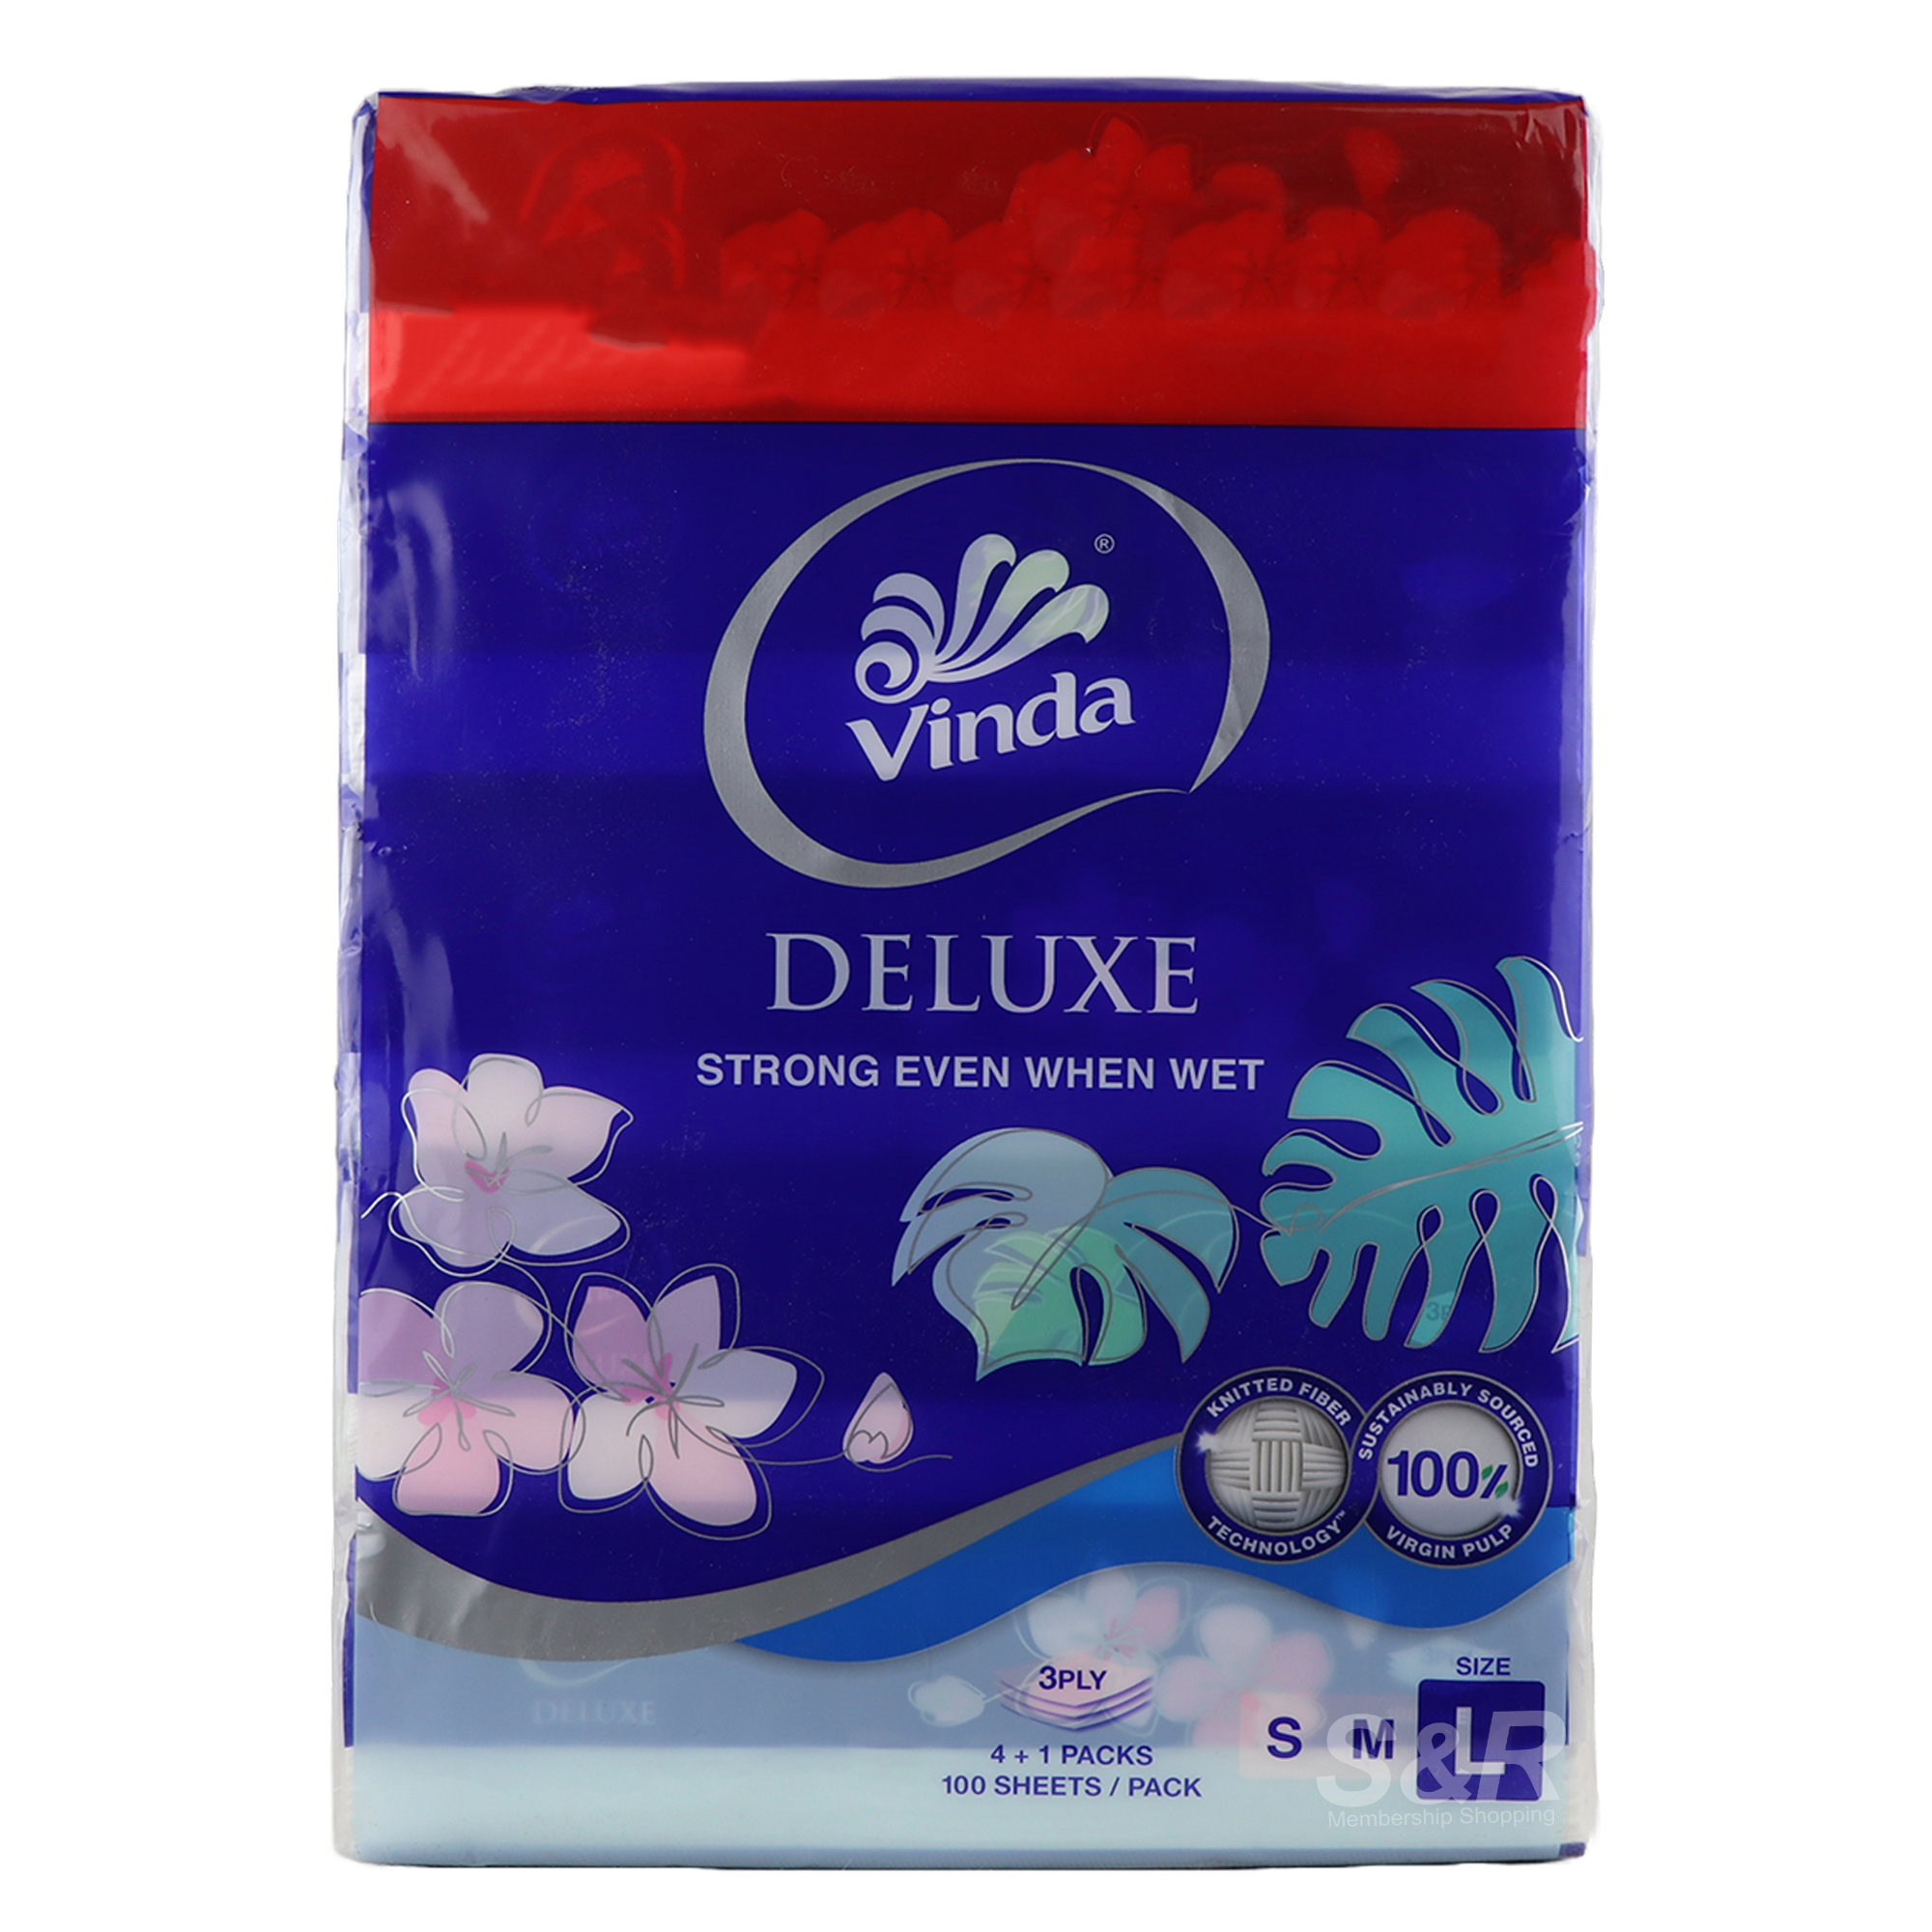 Vinda Deluxe 3-Ply Facial Tissues with Knitted Fiber Technology 5packs x 100sheets